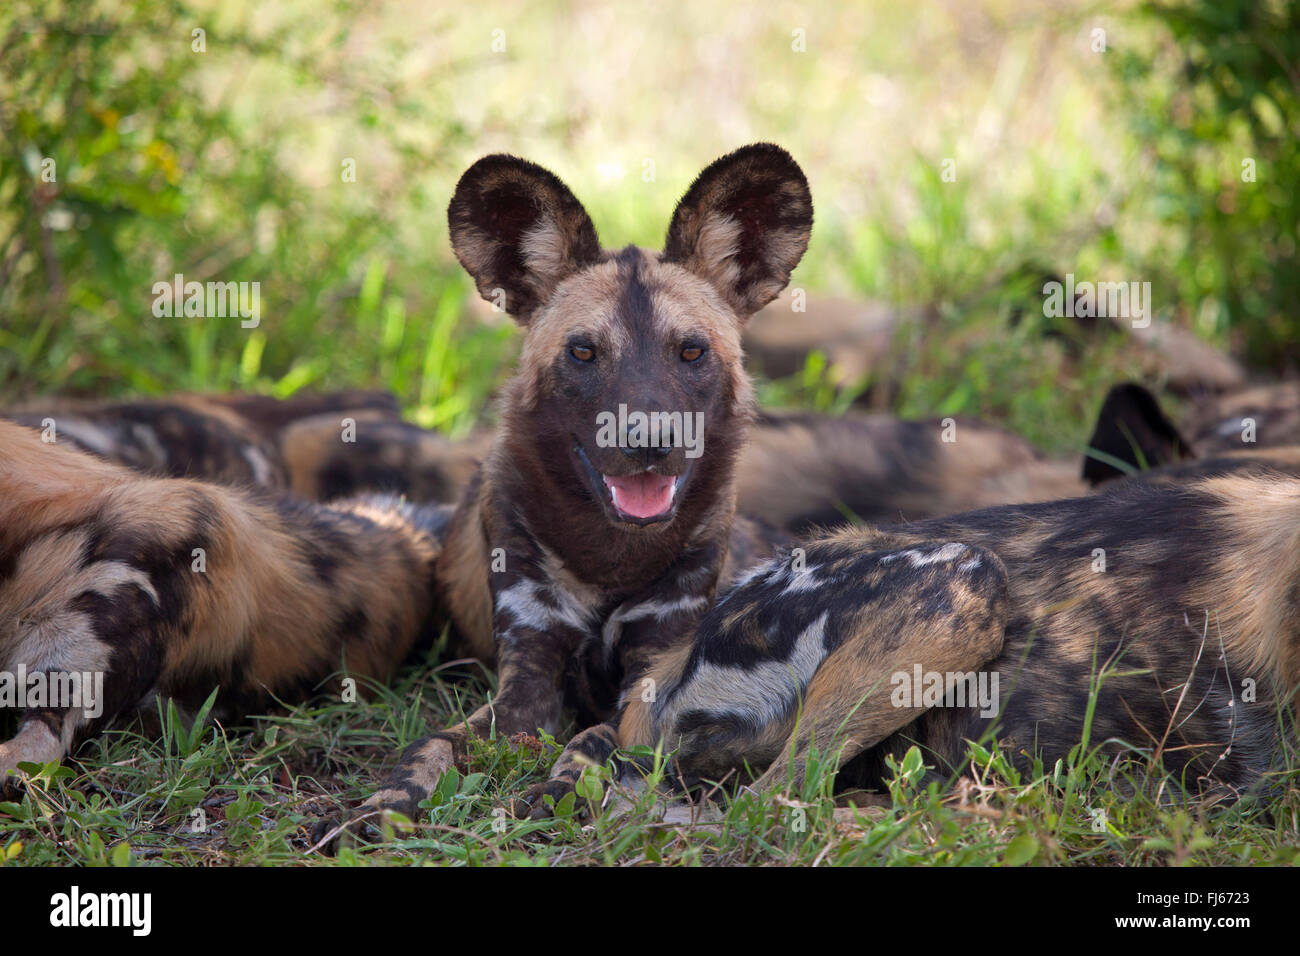 African wild dog, African hunting dog, Cape hunting dog, Painted dog, Painted wolf, Painted hunting dog, Spotted dog, Ornate wolf (Lycaon pictus), pack, South Africa, Krueger National Park Stock Photo